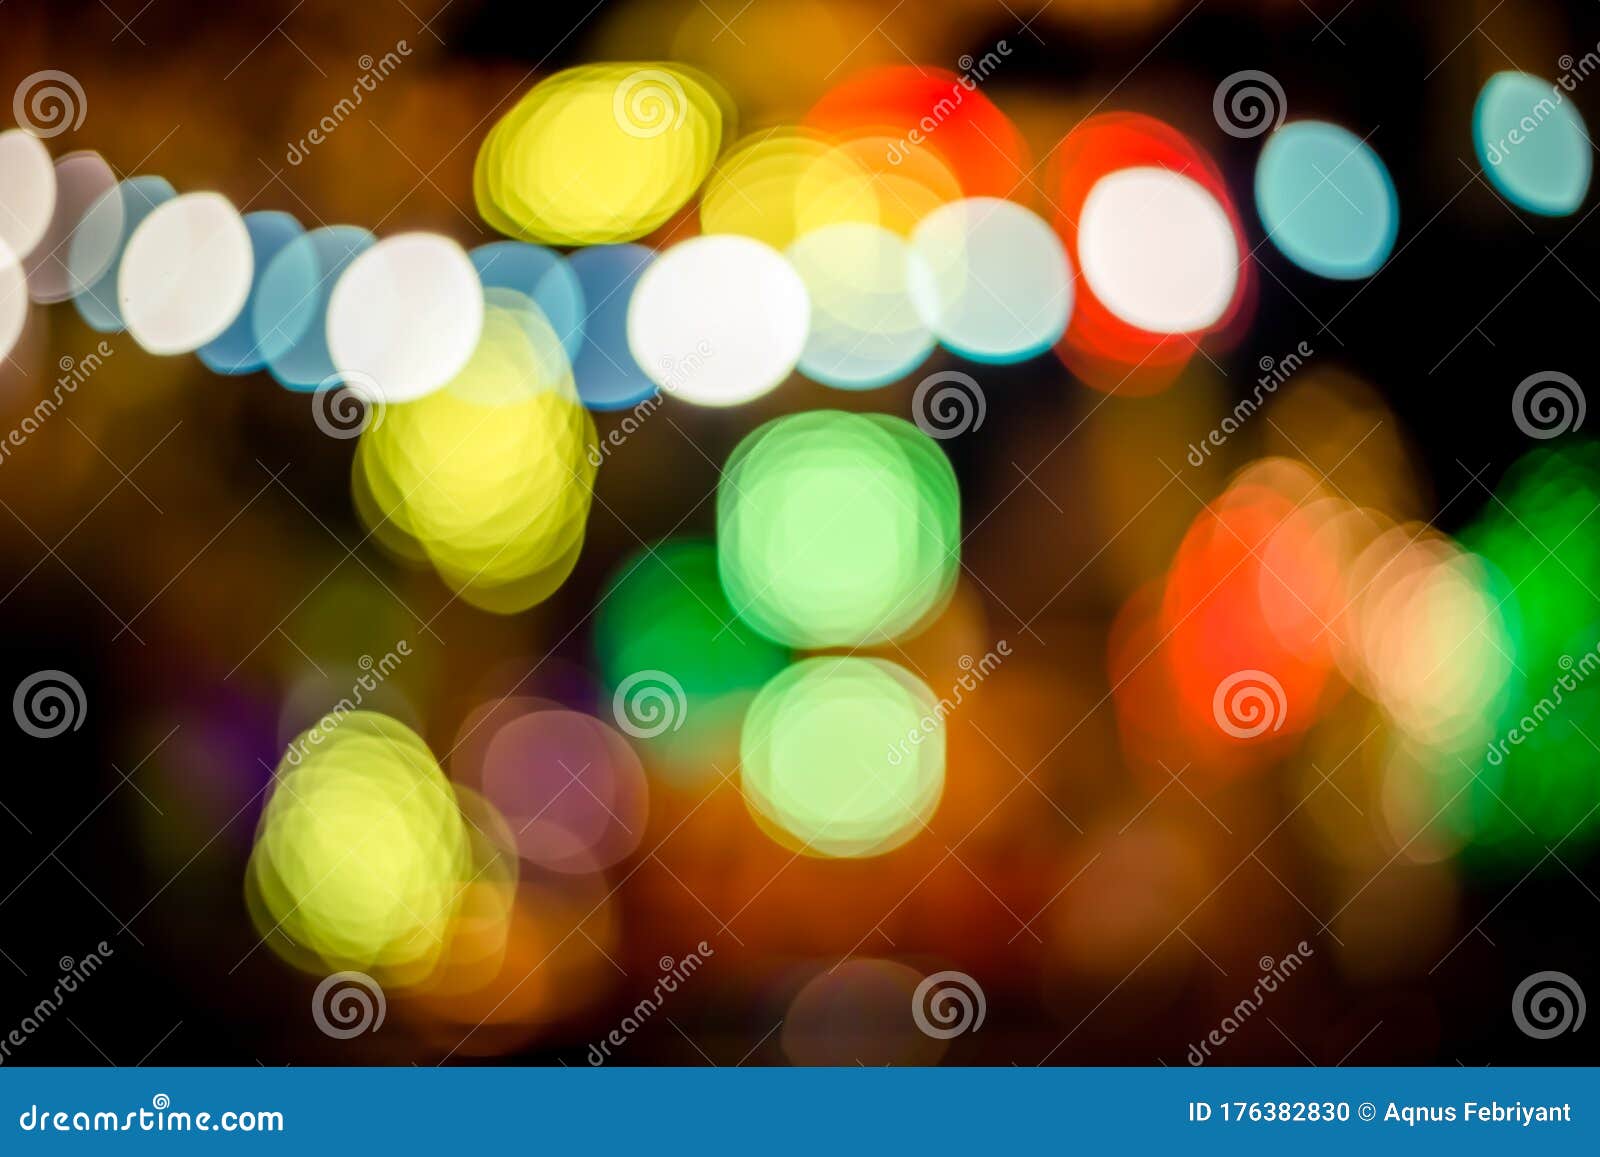 Colorful Light Effect for Abstract Background Stock Photo - Image of ...